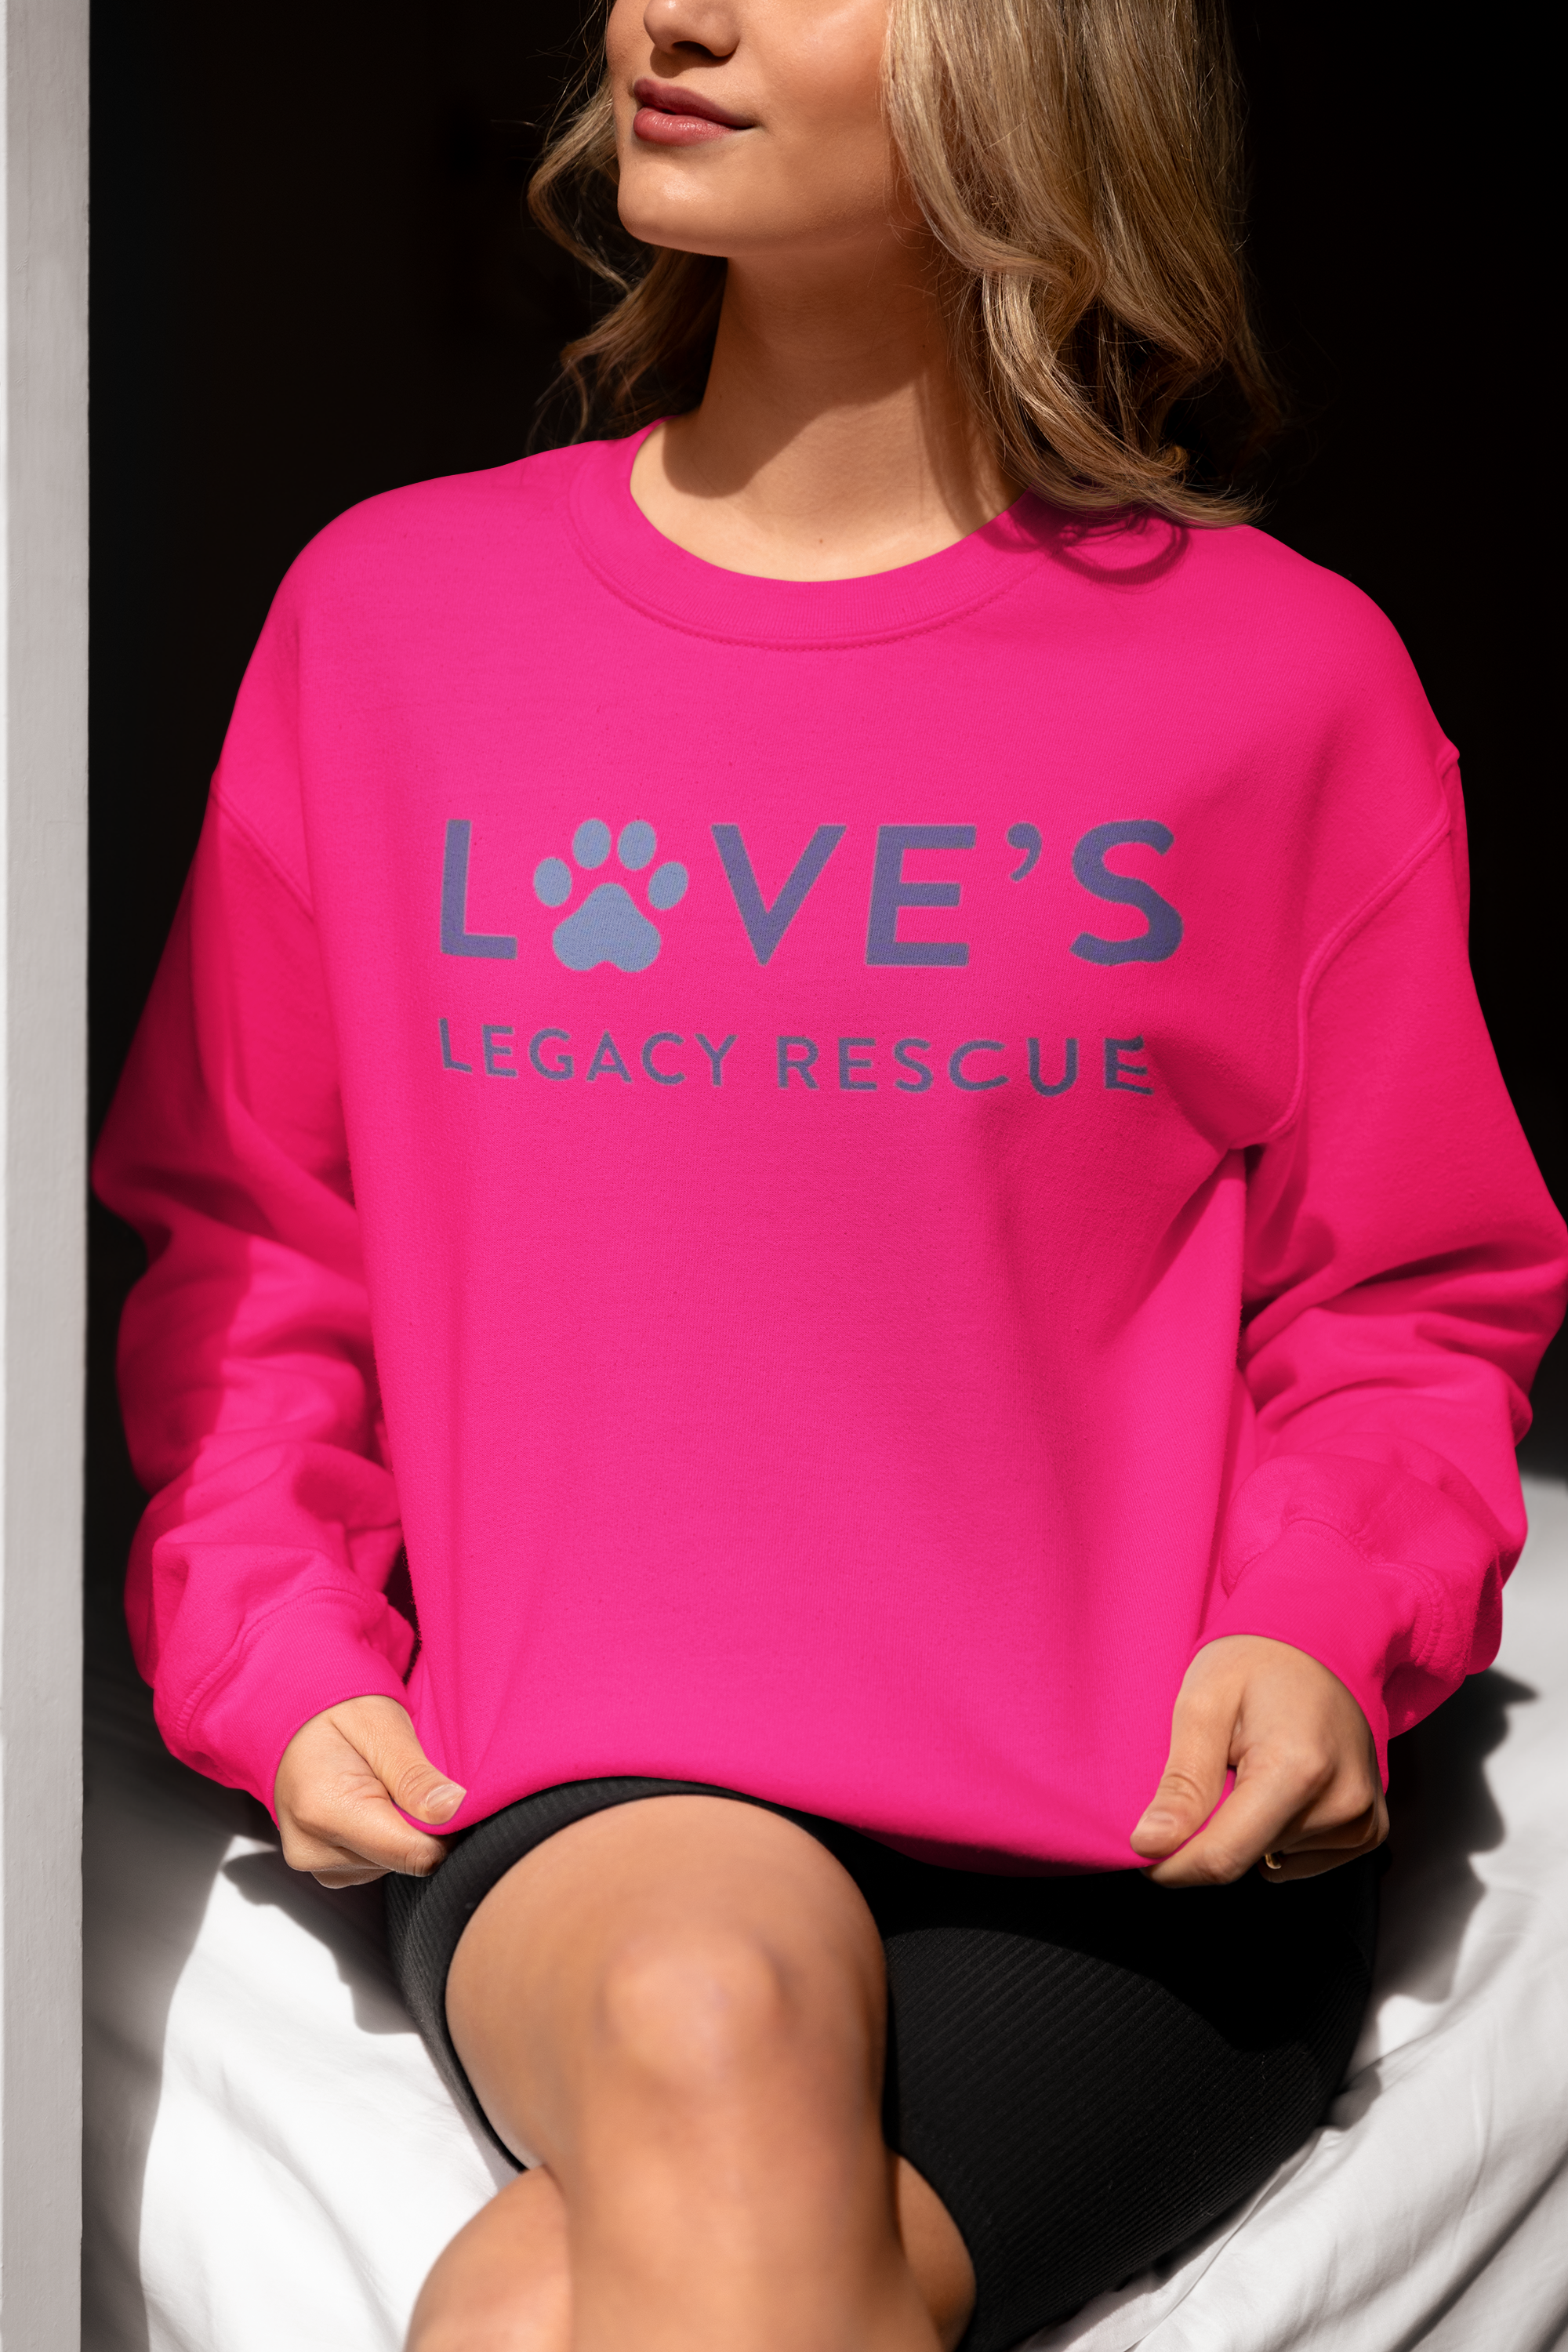 Love's Sweatshirts (Available in several colors)